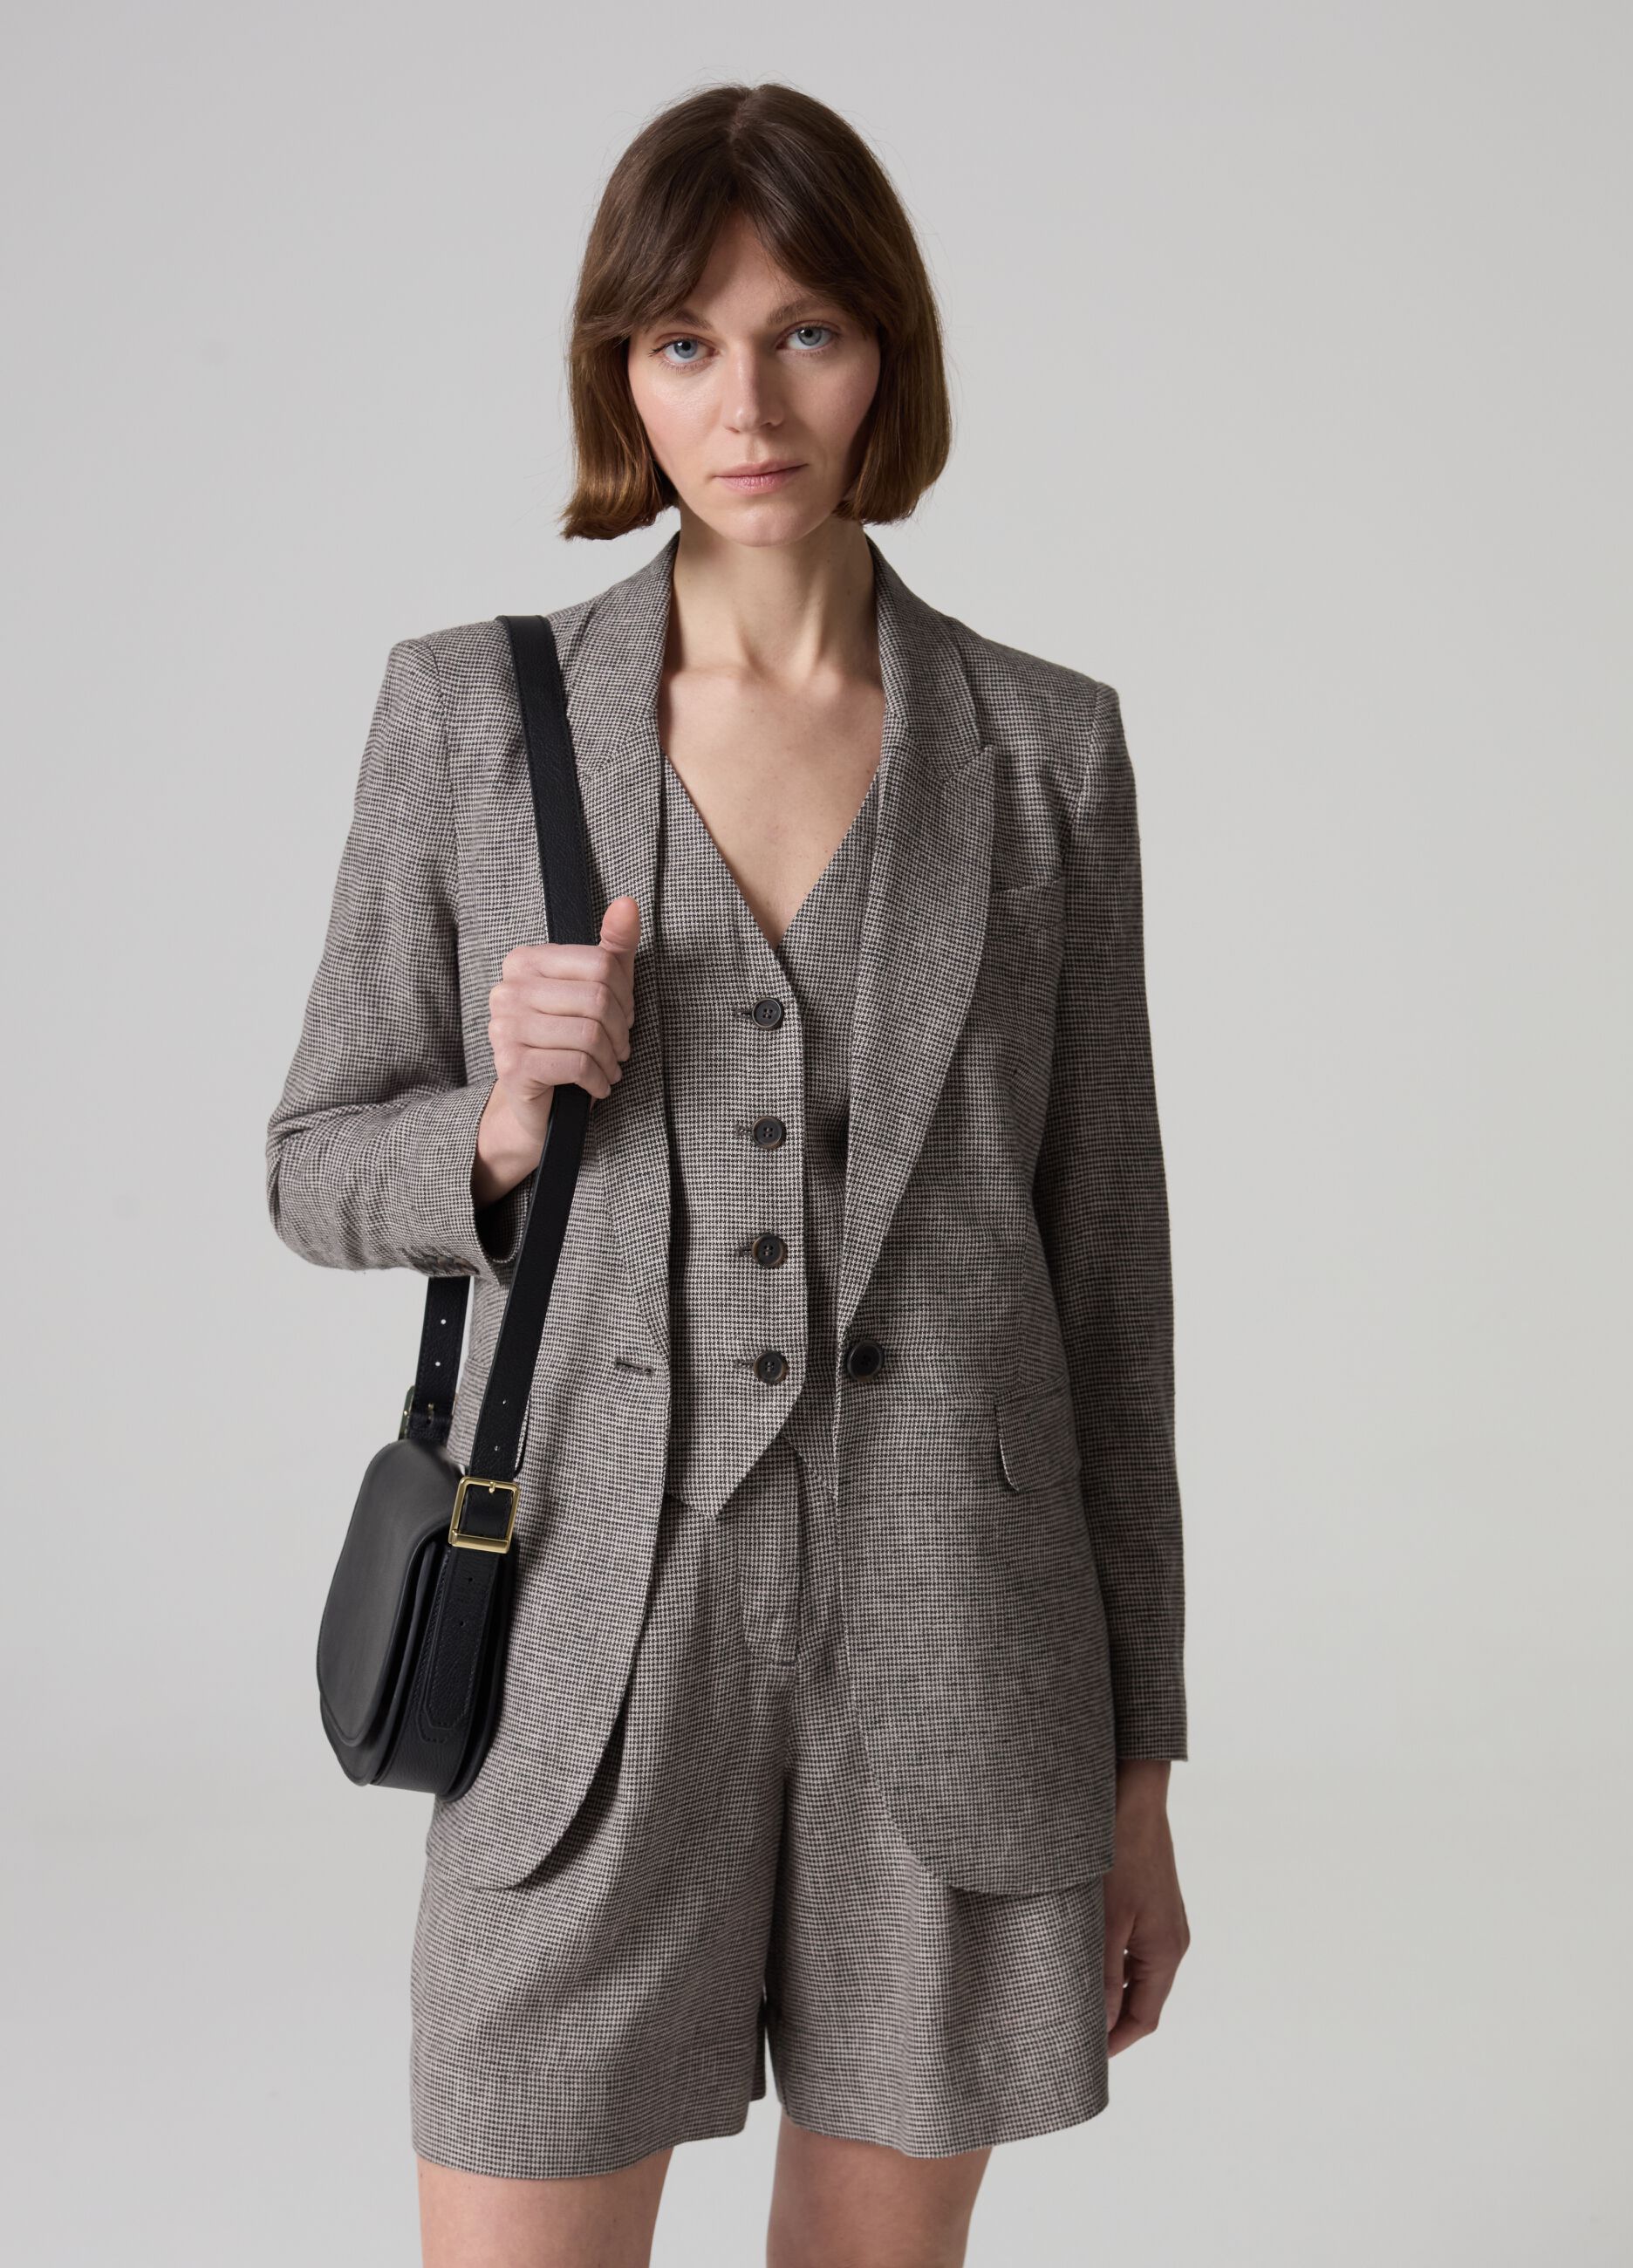 Contemporary single-breasted blazer with micro houndstooth pattern